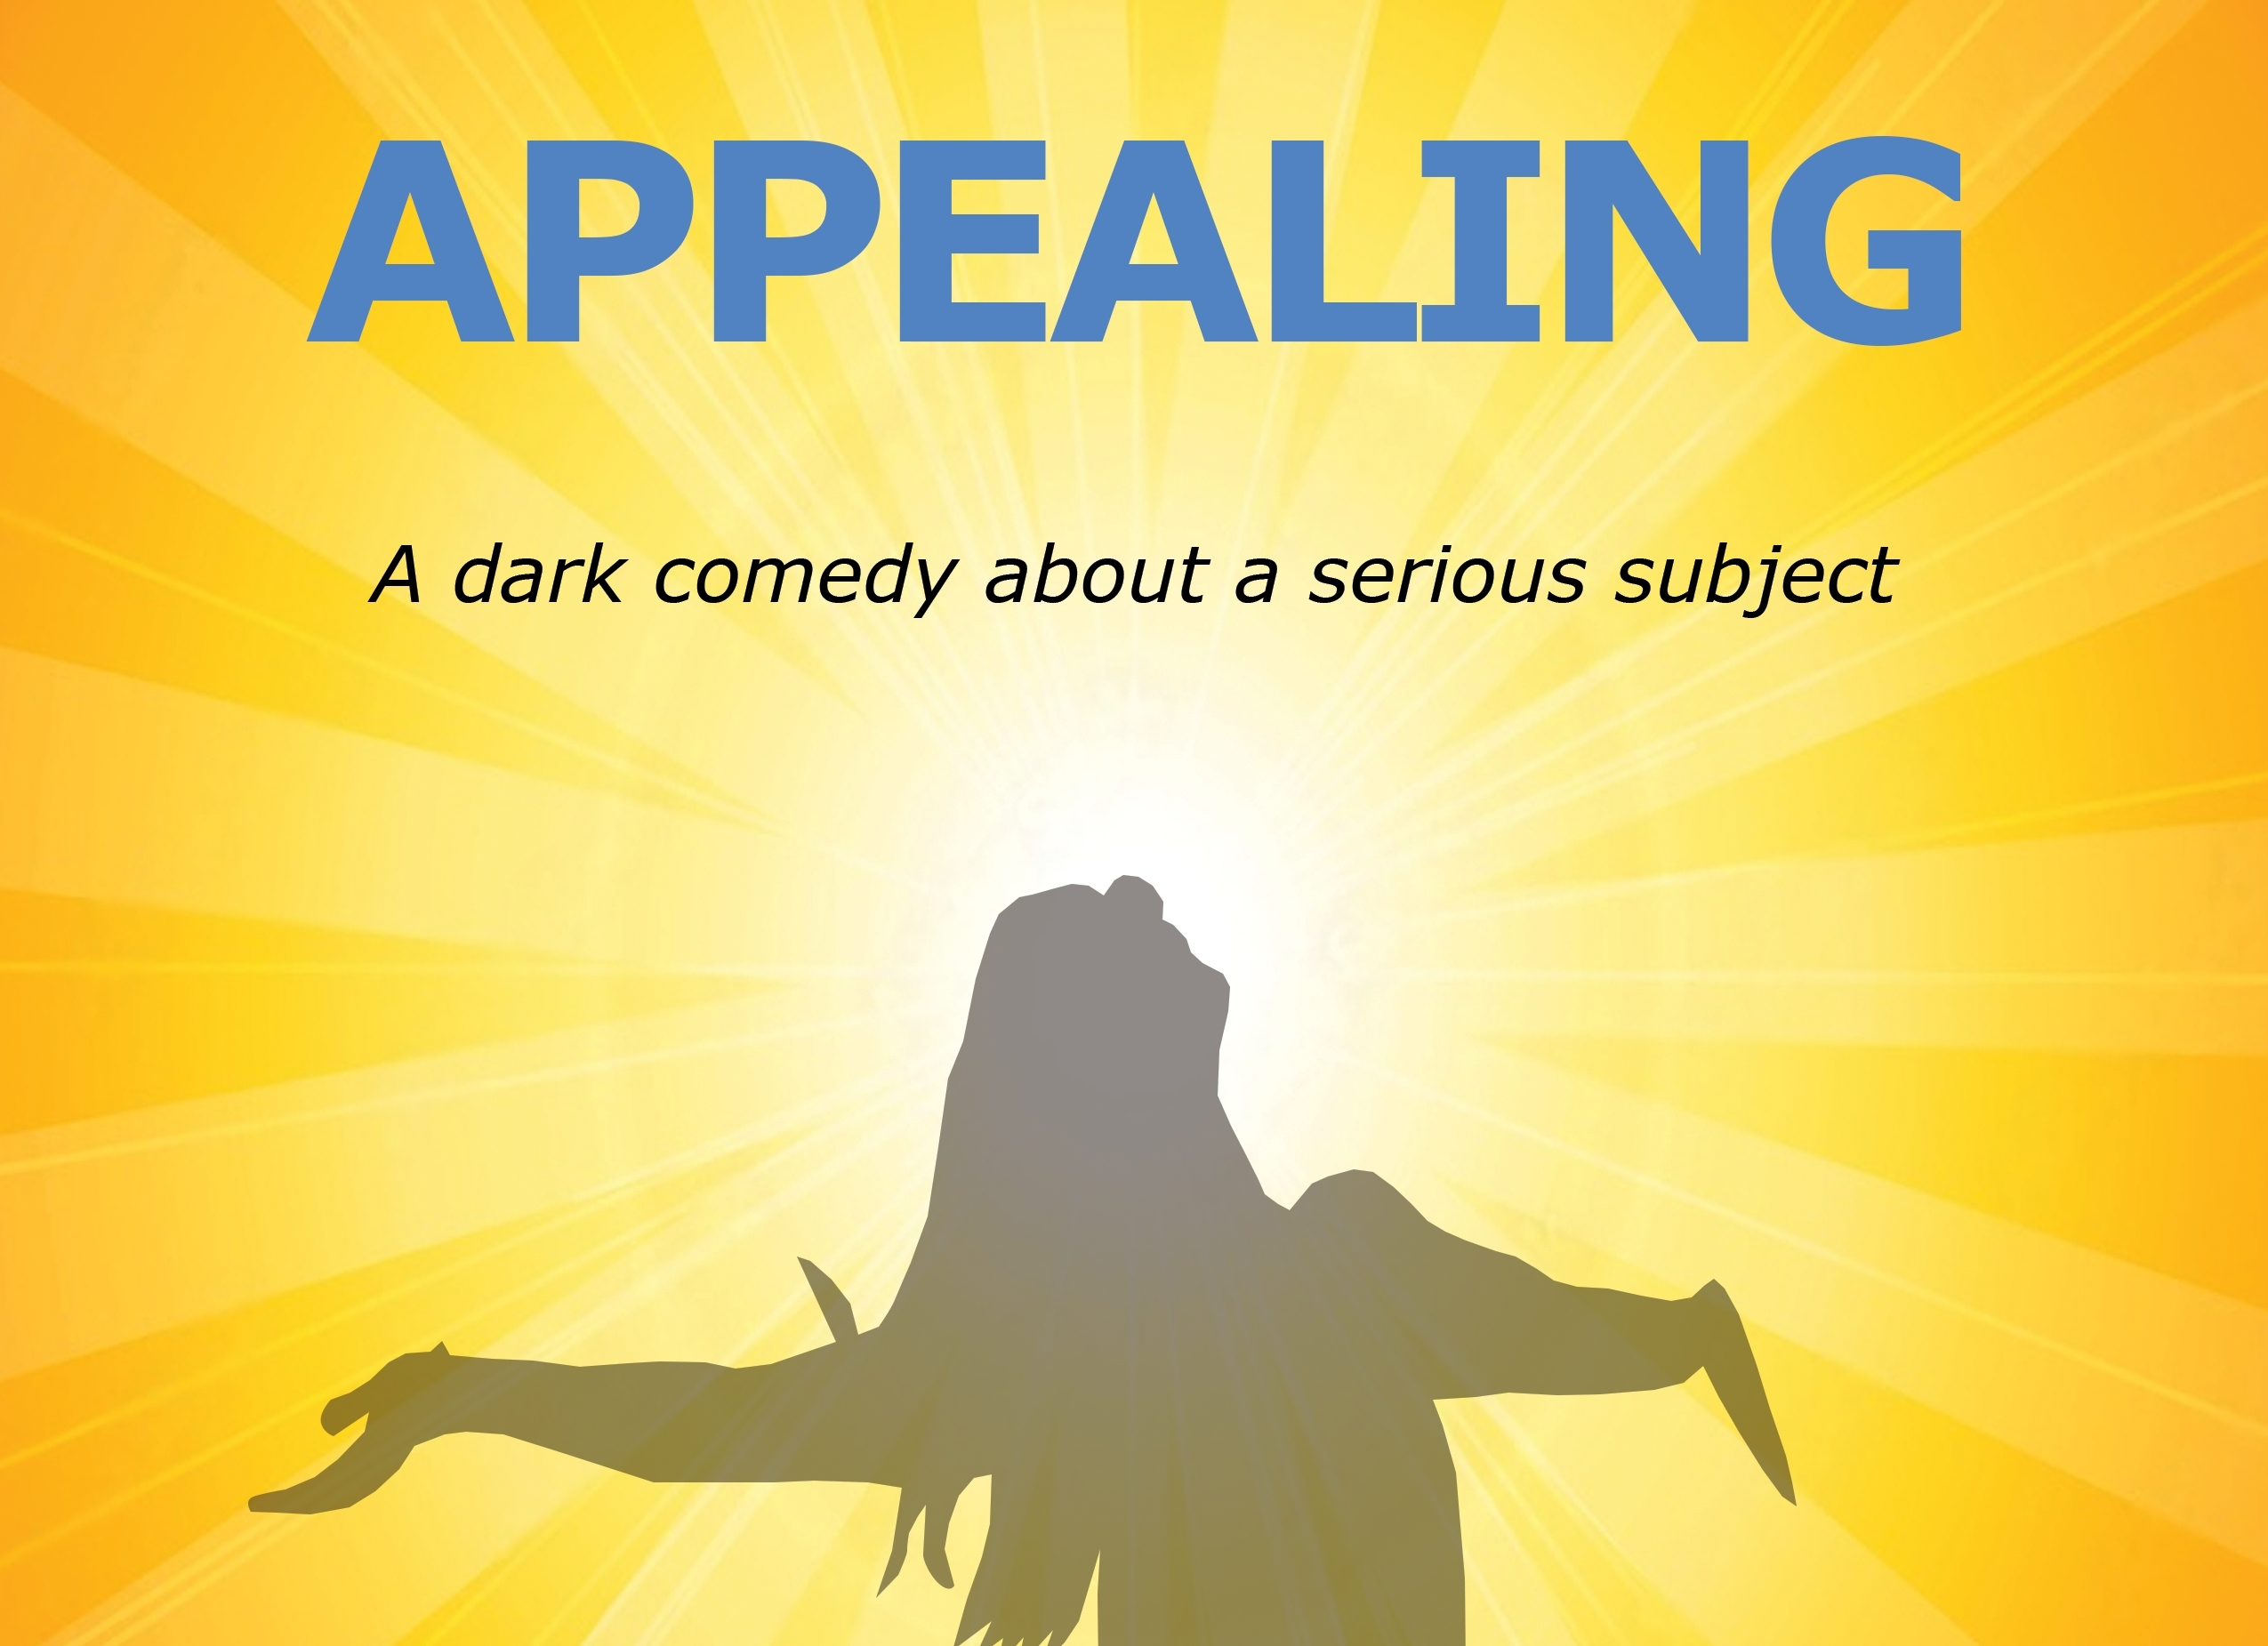 APPEALING: A dark comedy about a serious subject